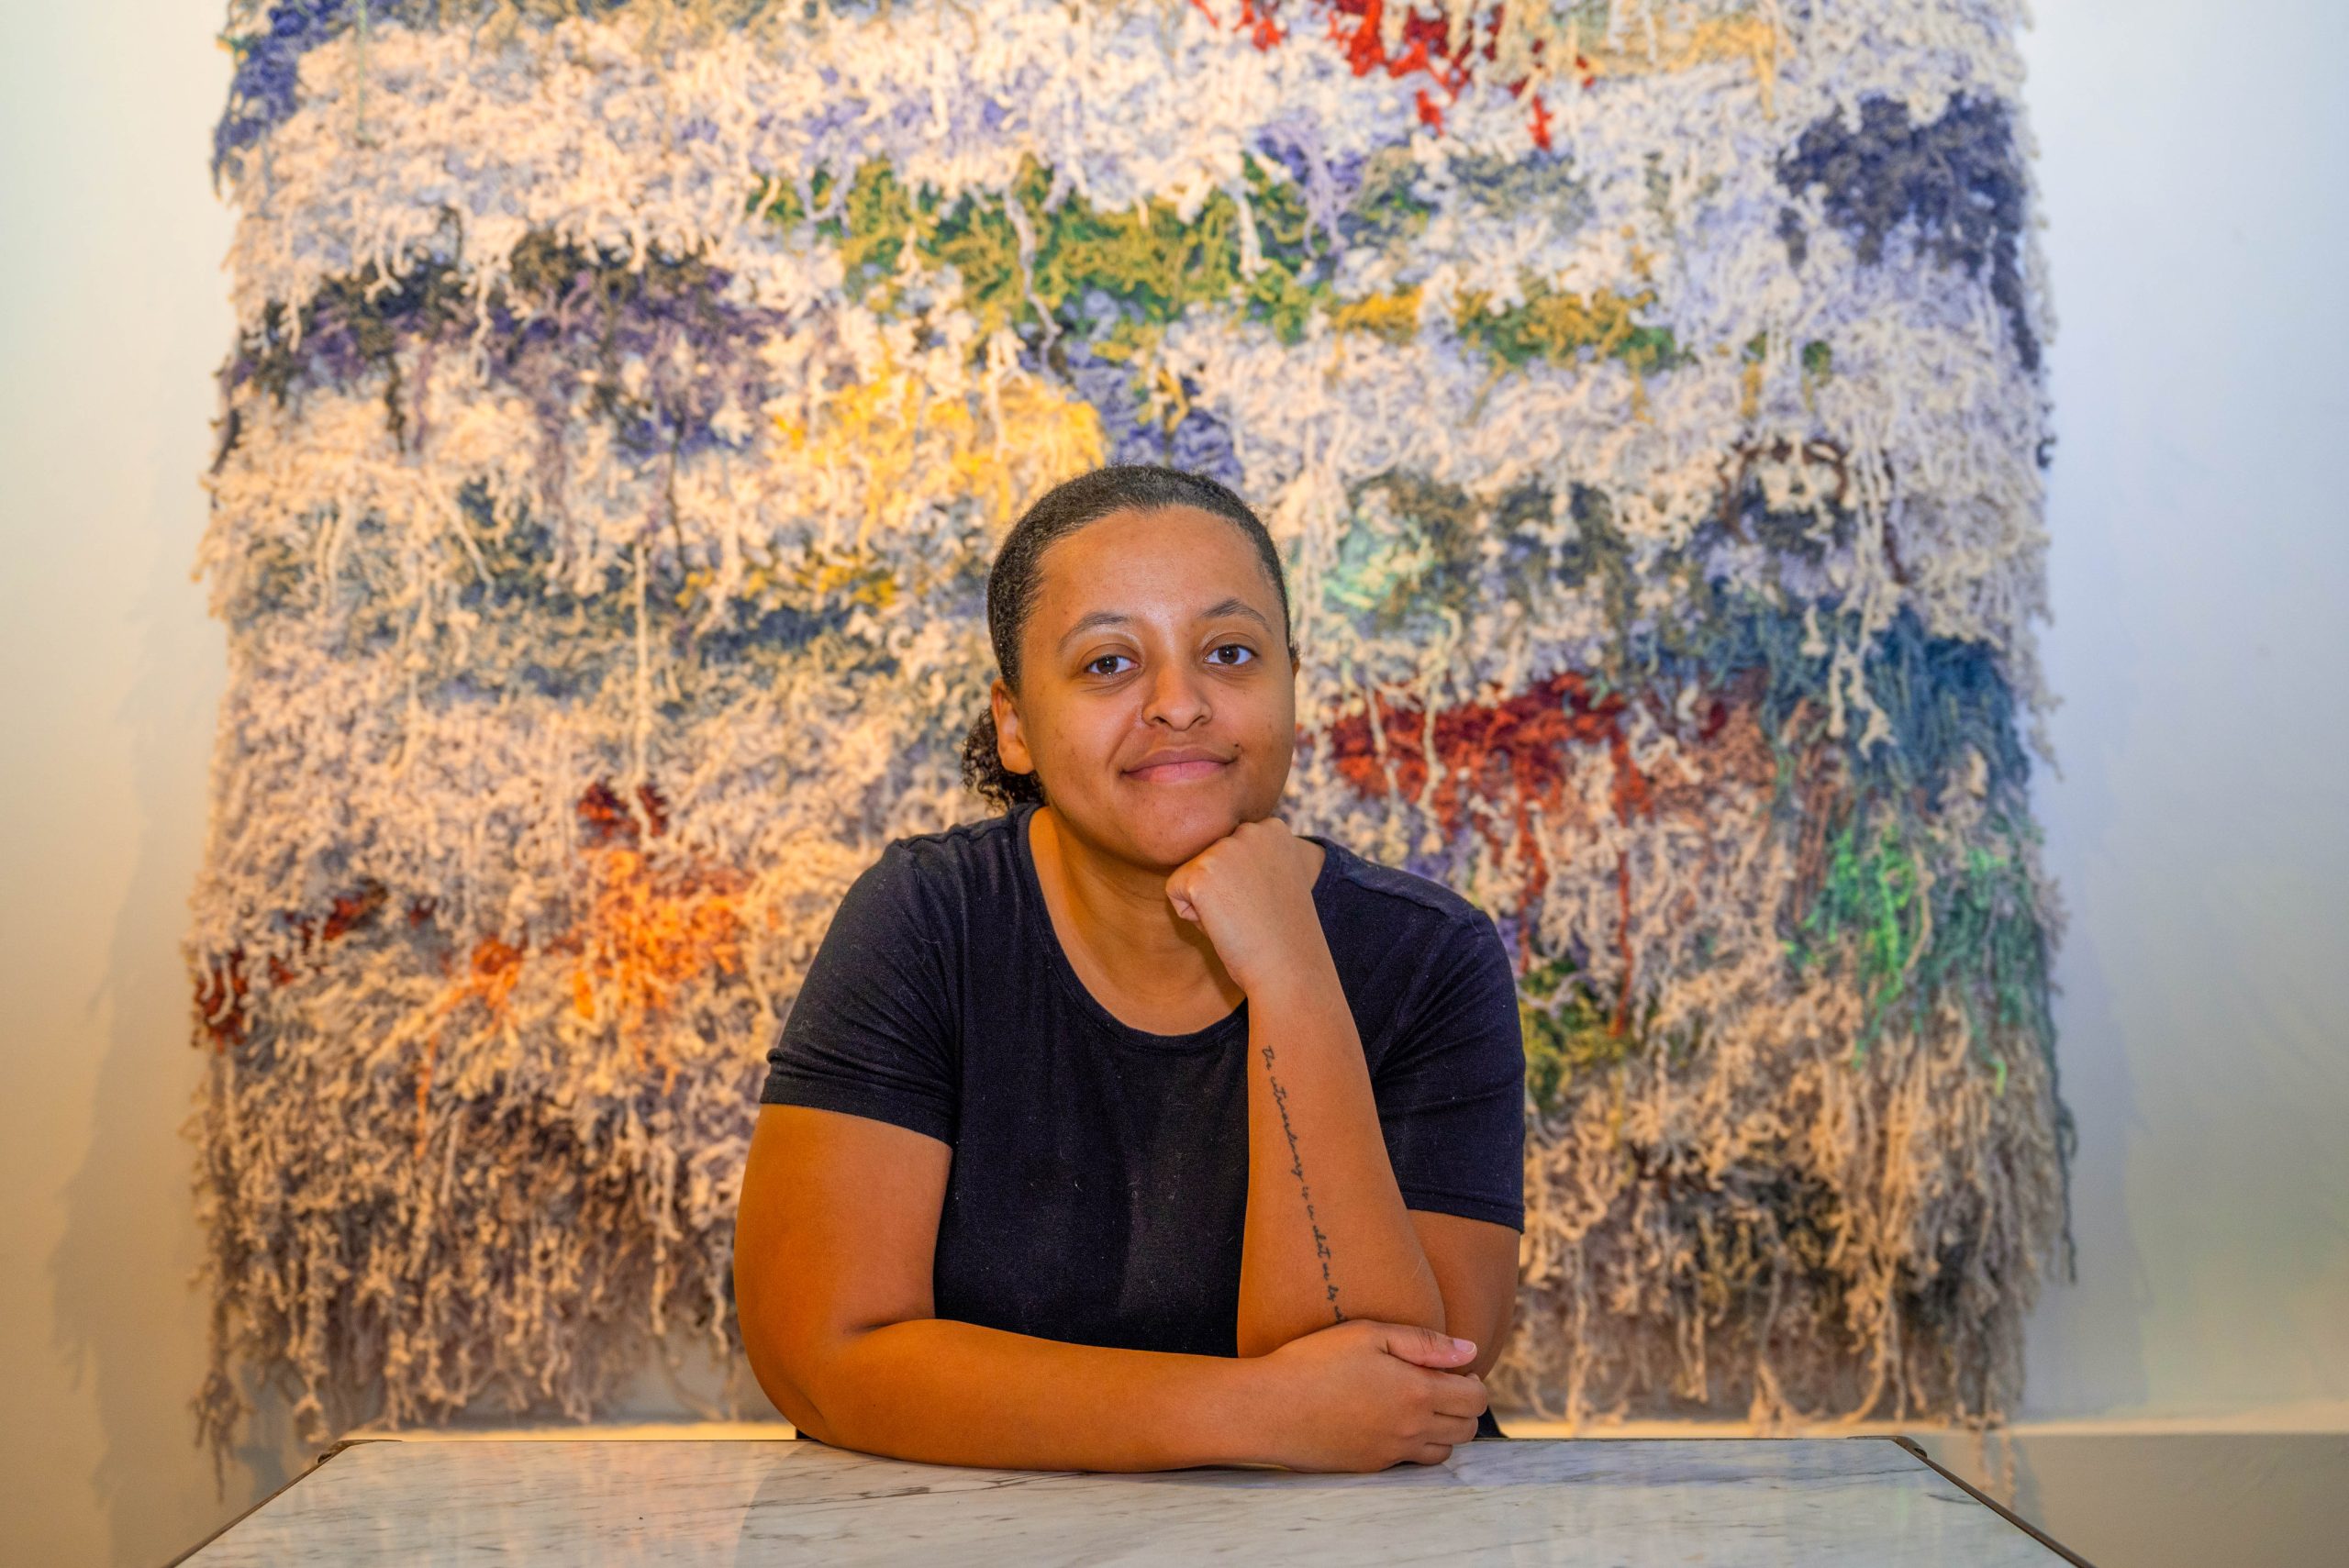 Image: Bryana Bibbs poses in front of her woven artwork Numb, created in 2023. The woven artwork is approximately six feet tall and six and a half feet wide. The color of the woven yarns is predominately white with speckles of other colors including hues of blue, purple, red, brown, and yellow. Photography by Tonal Simmons.